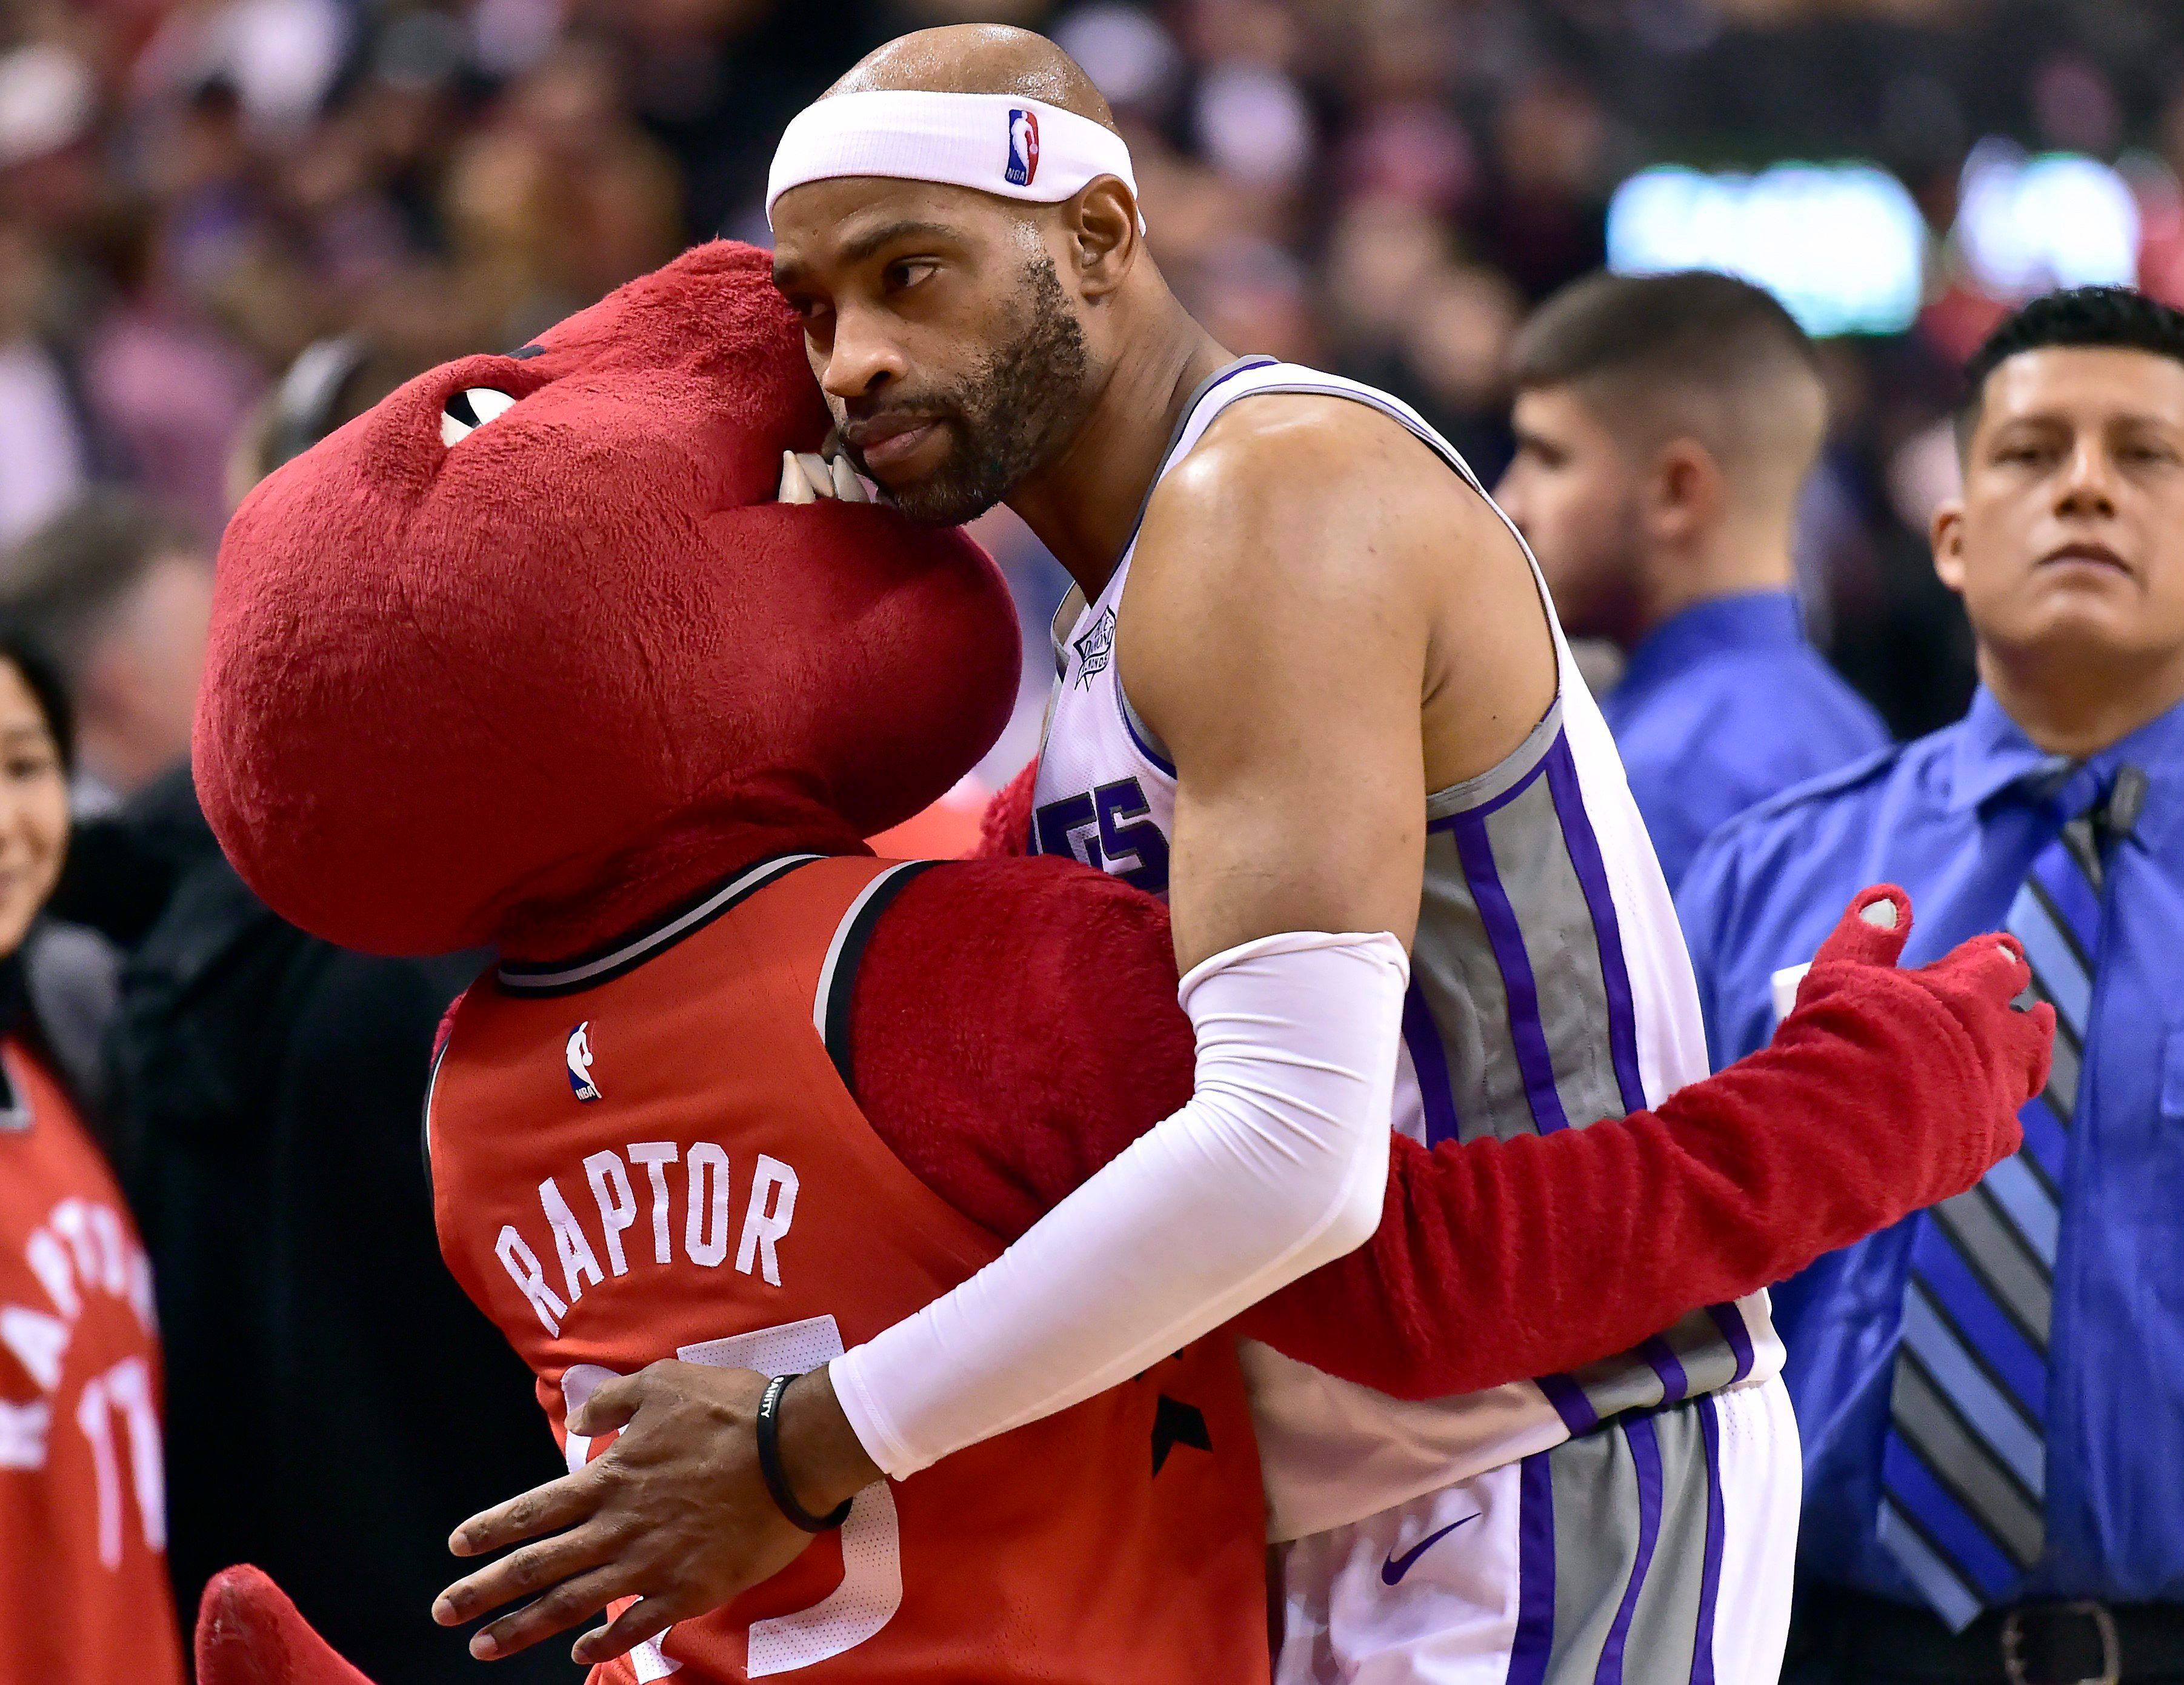 VIDEO: Vince Carter Gets Standing Ovation From Toronto Fans For